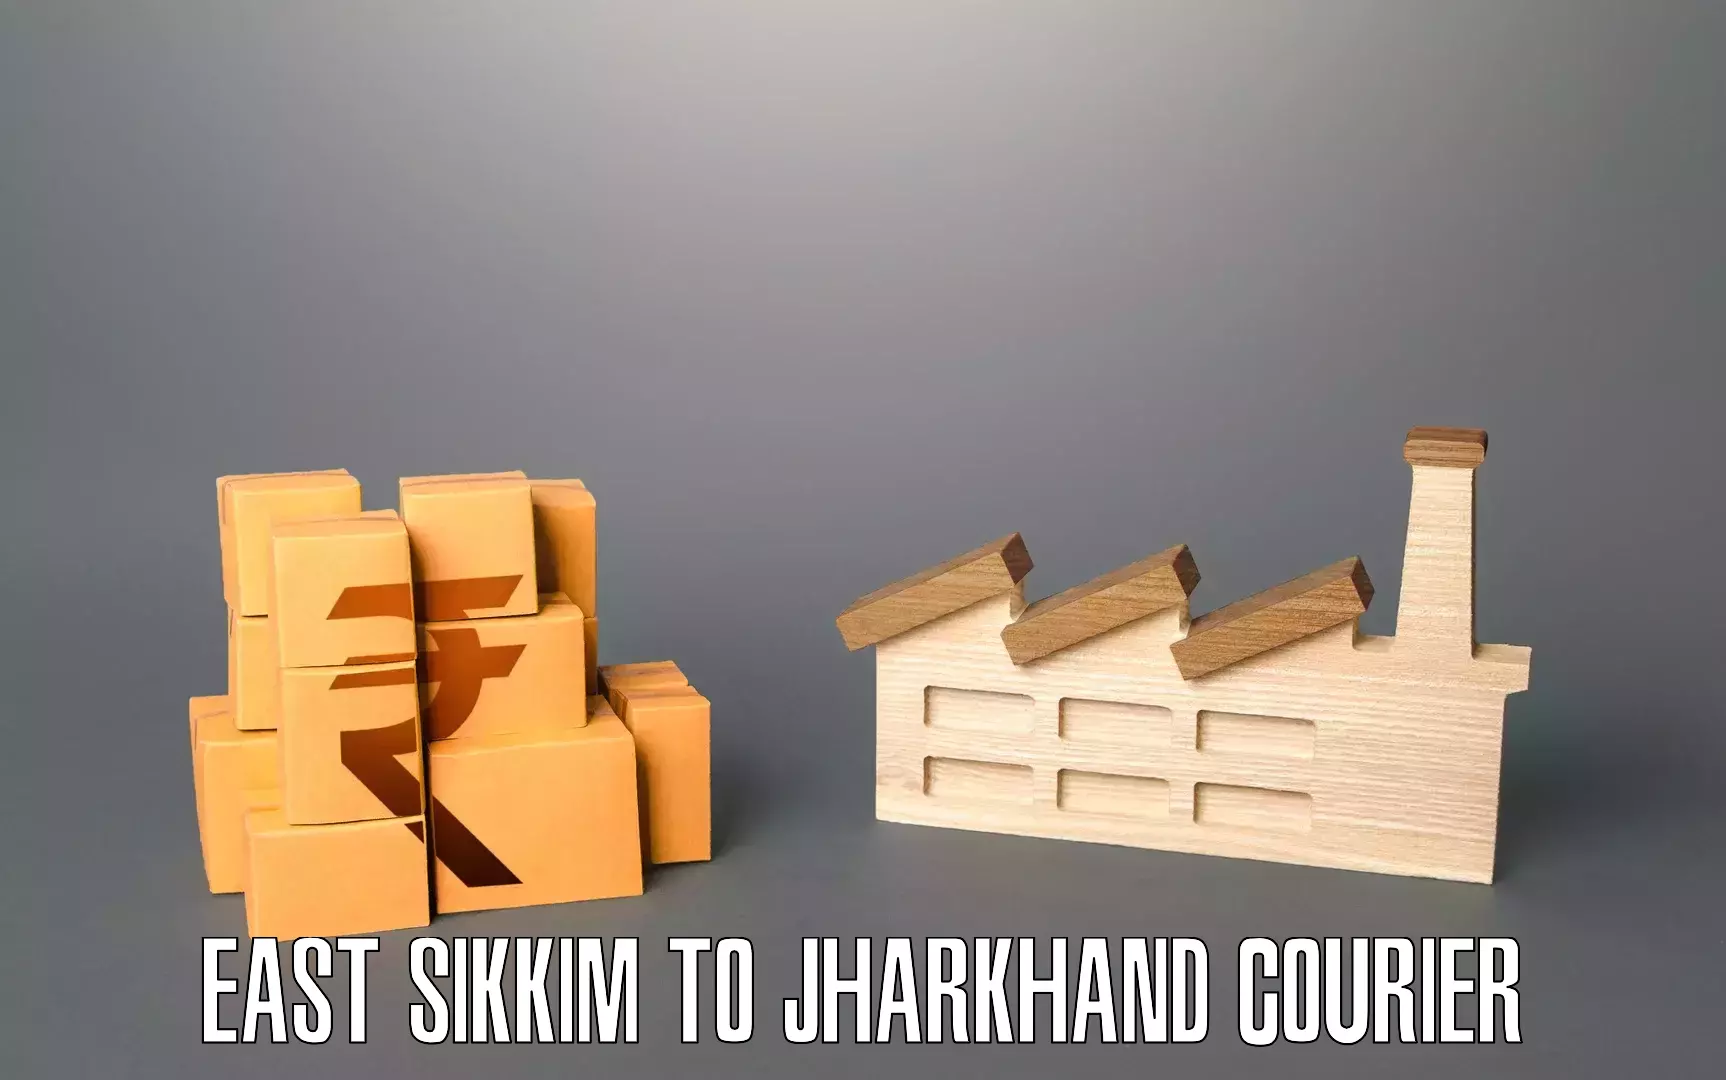 Furniture transport experts East Sikkim to Jharkhand